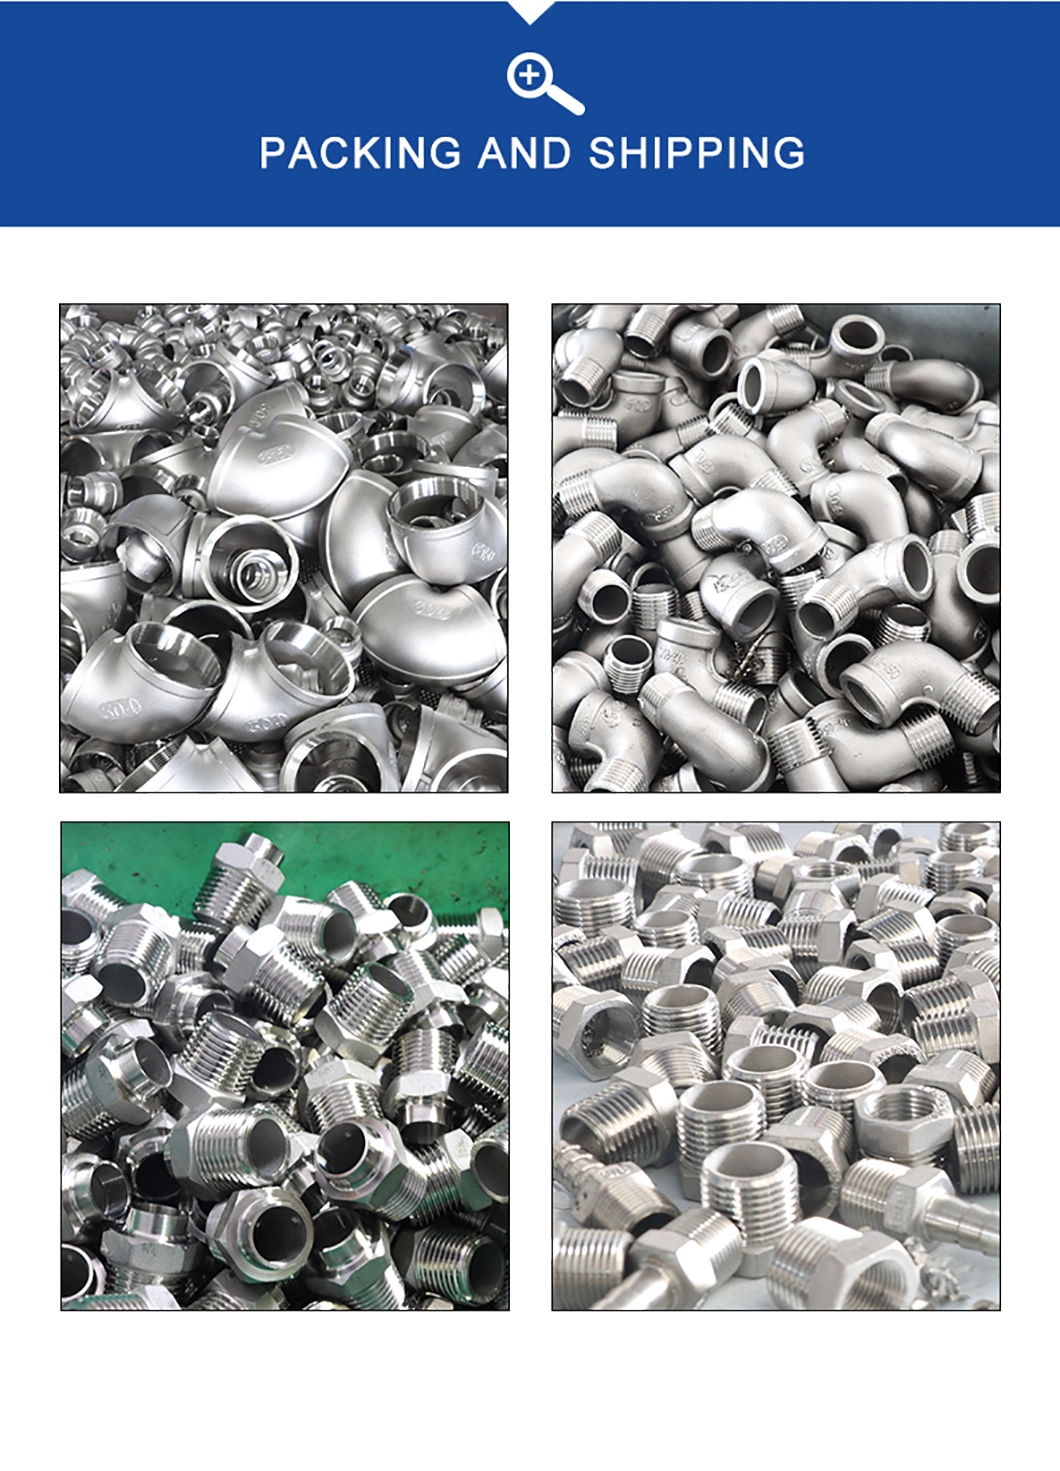 Stainless Steel Pipe Fitting 304 Forging Welded Equal Tees